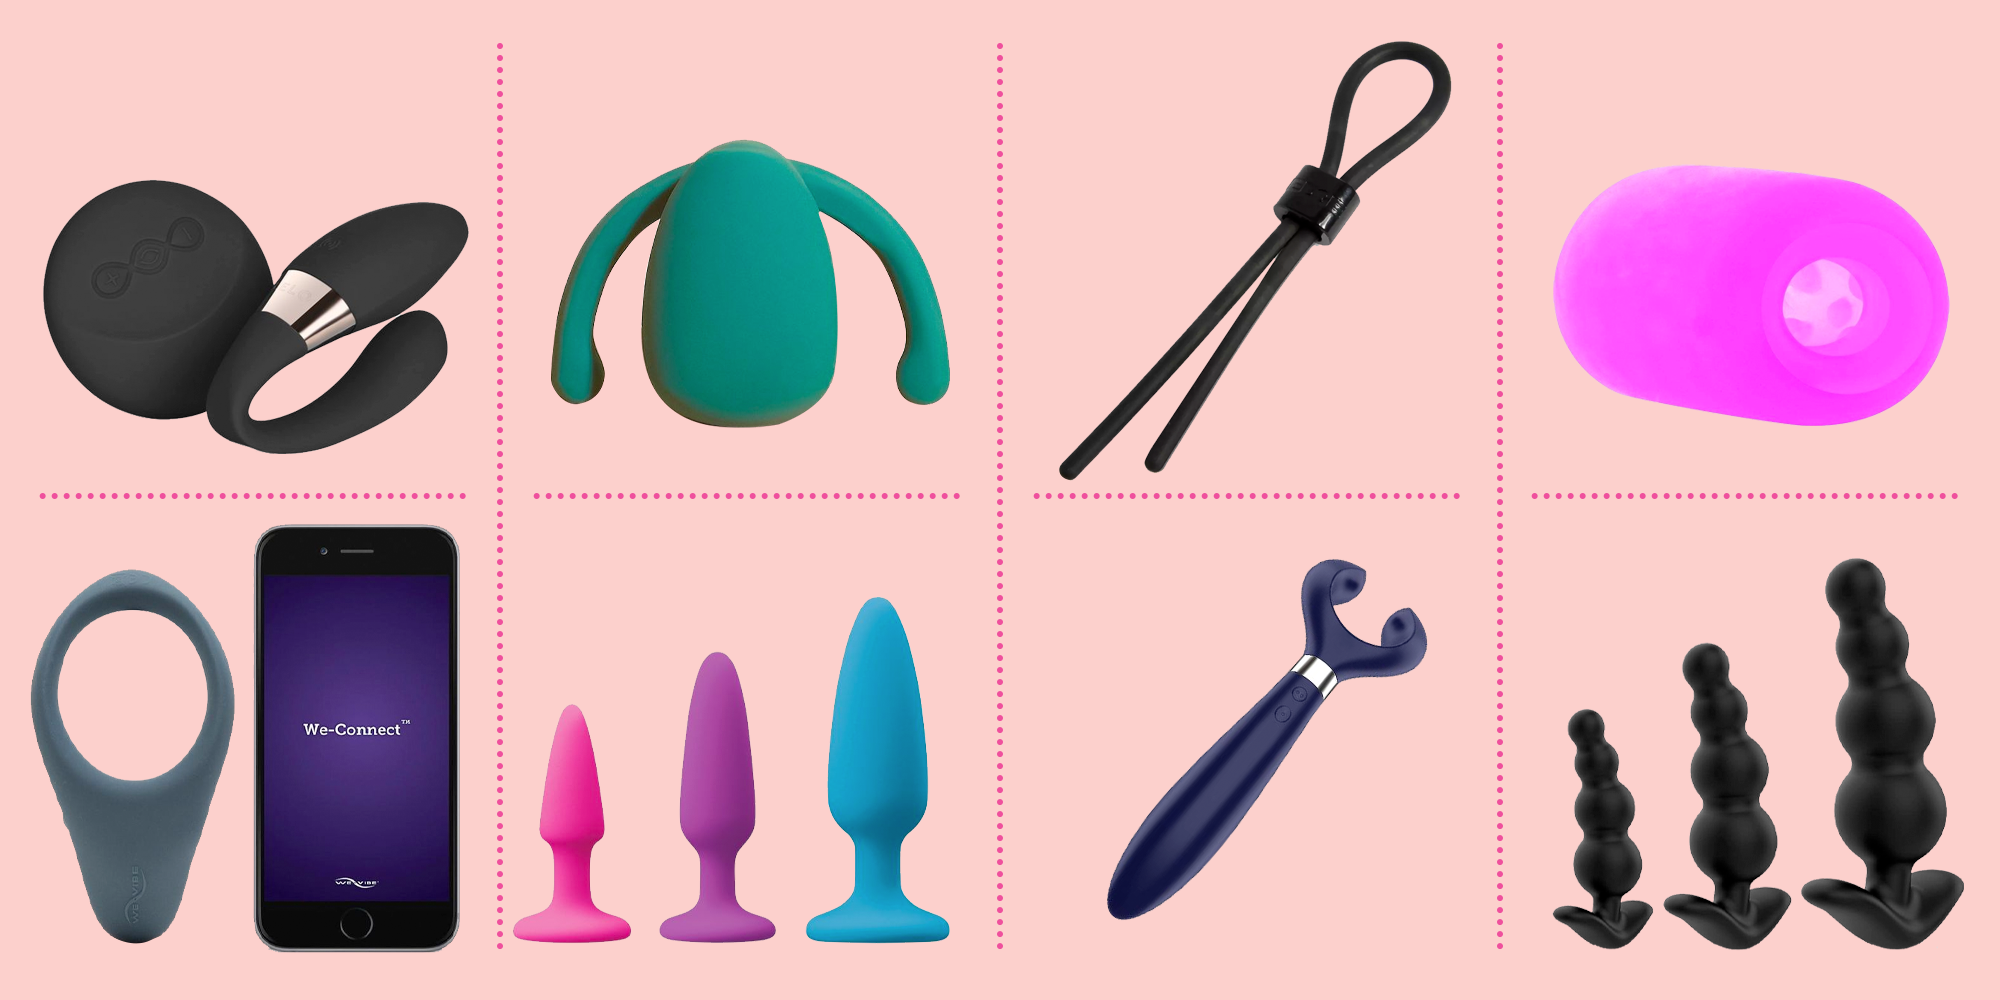 5 popular sex toys to add to your bedroom playtime, plus safety concerns to  remember